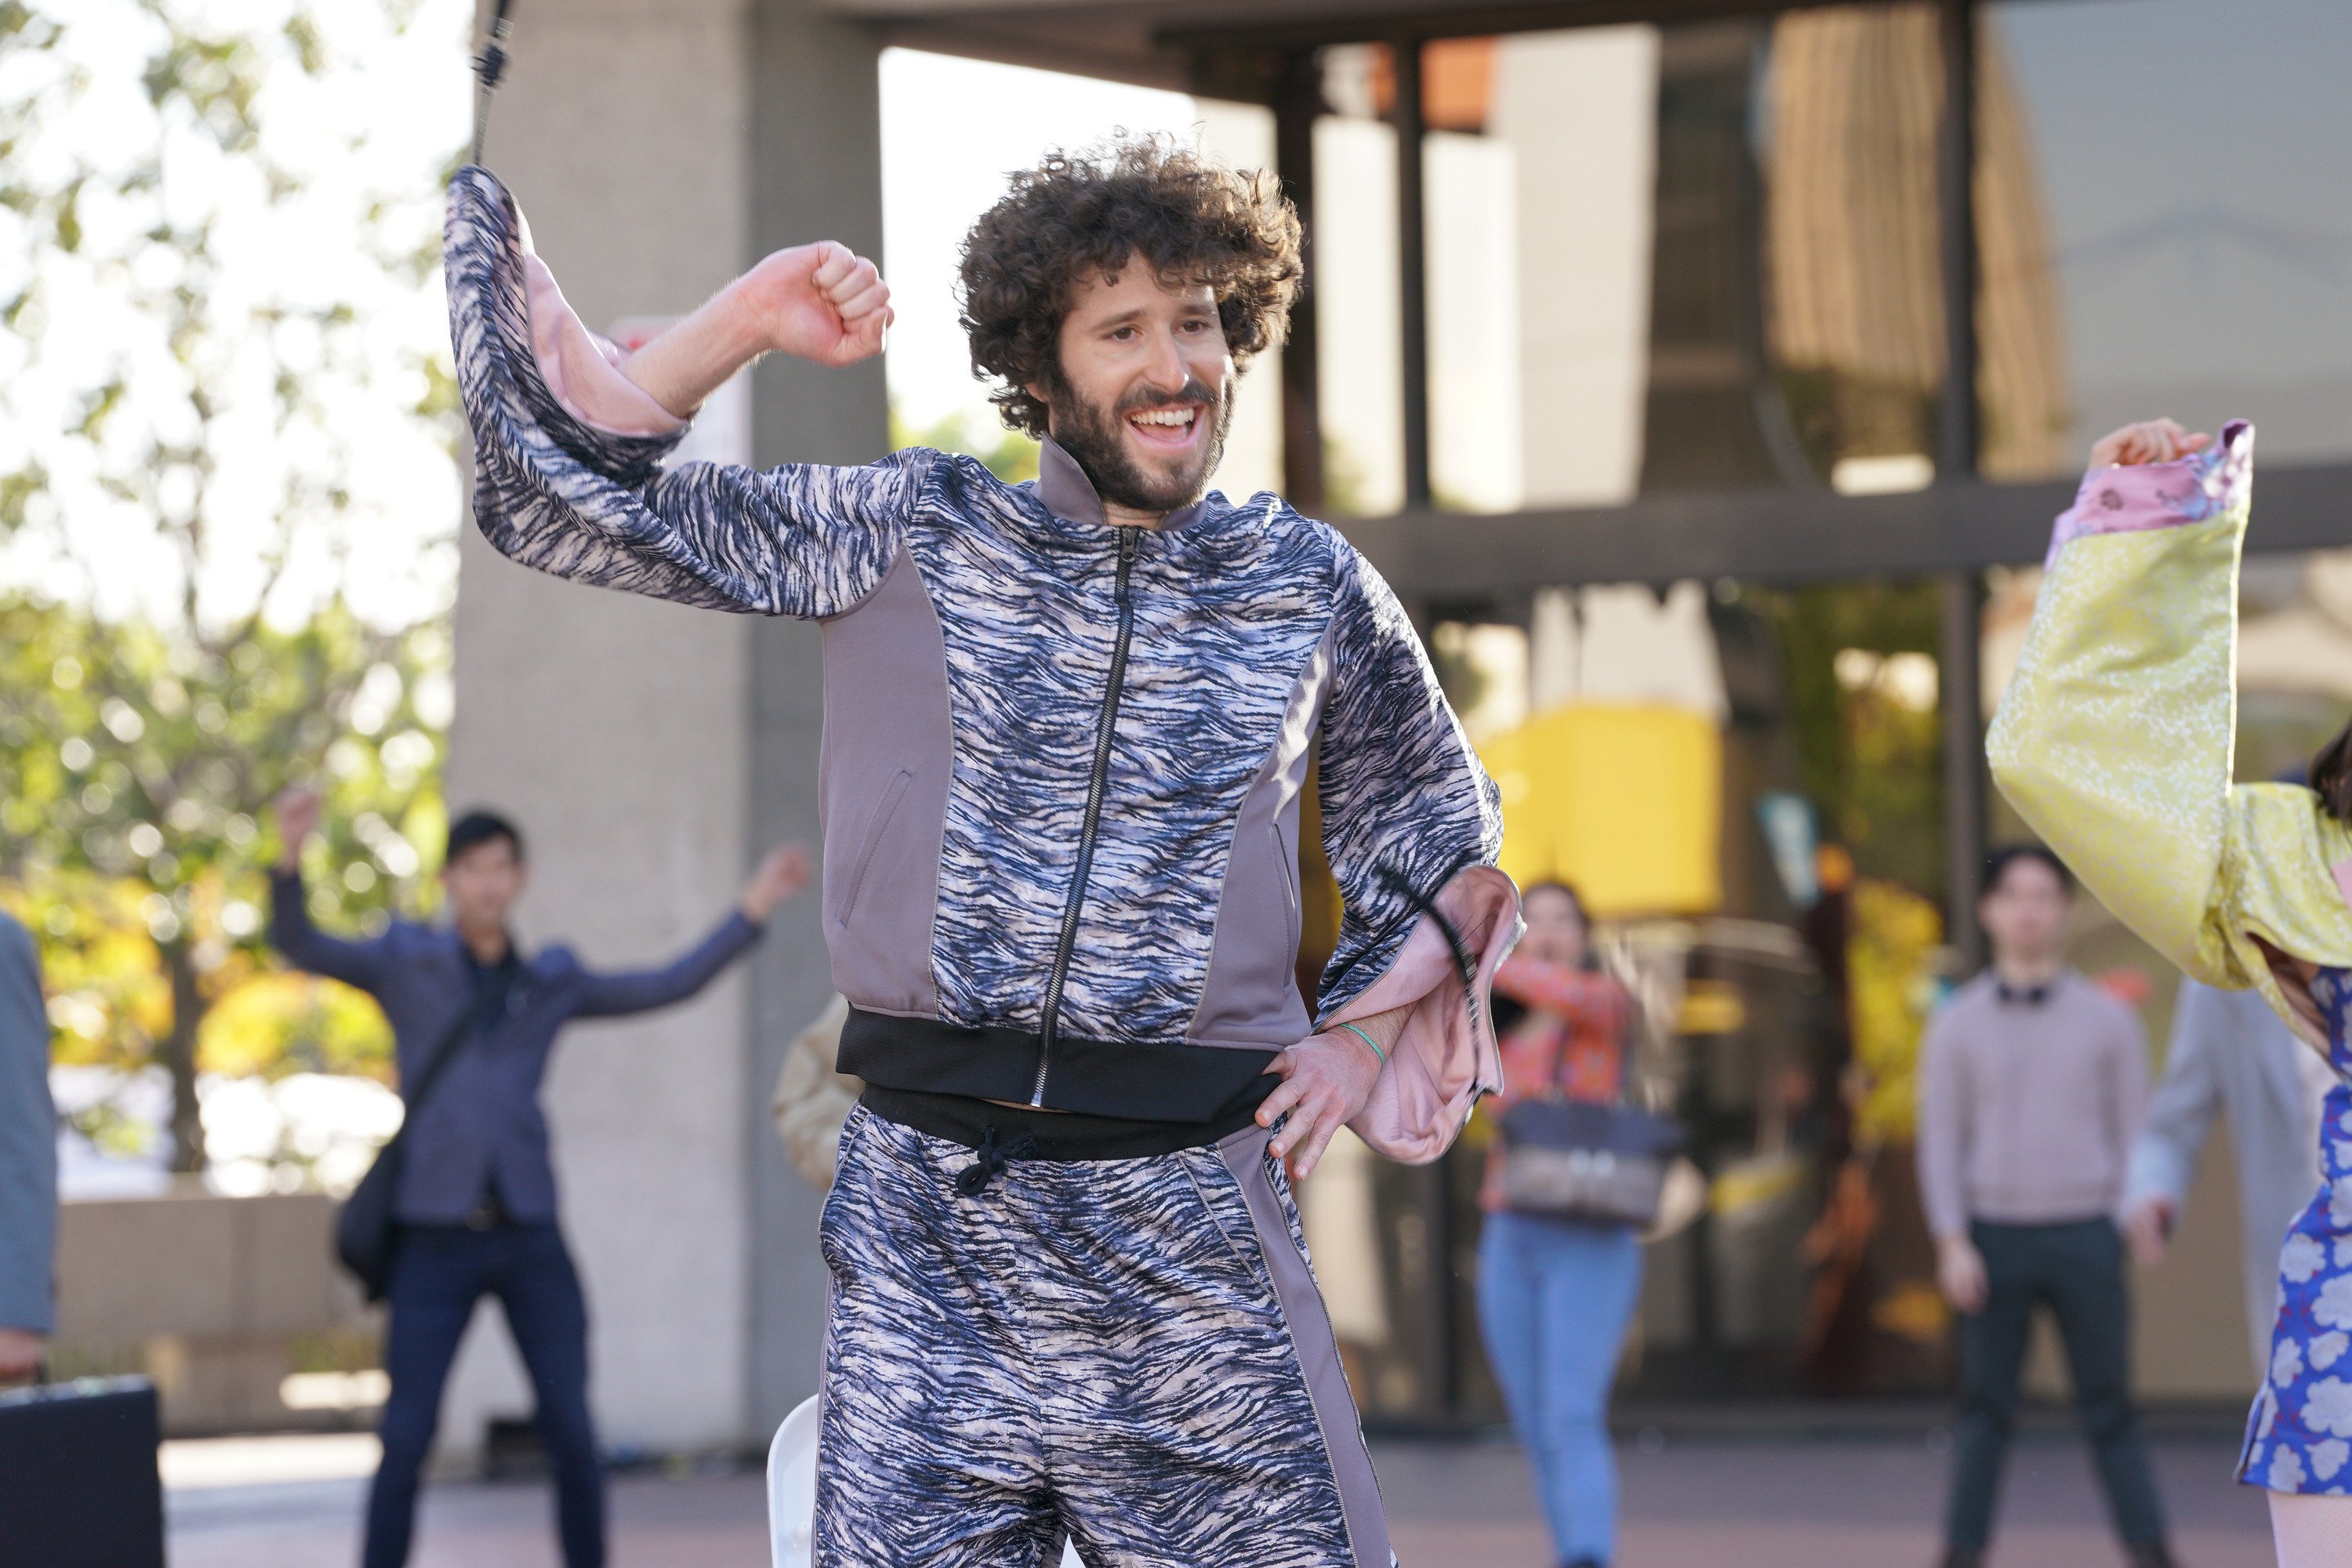 Dave 'Lil Dicky' Burd dances in a music video in the first episode of 'Dave' Season 2